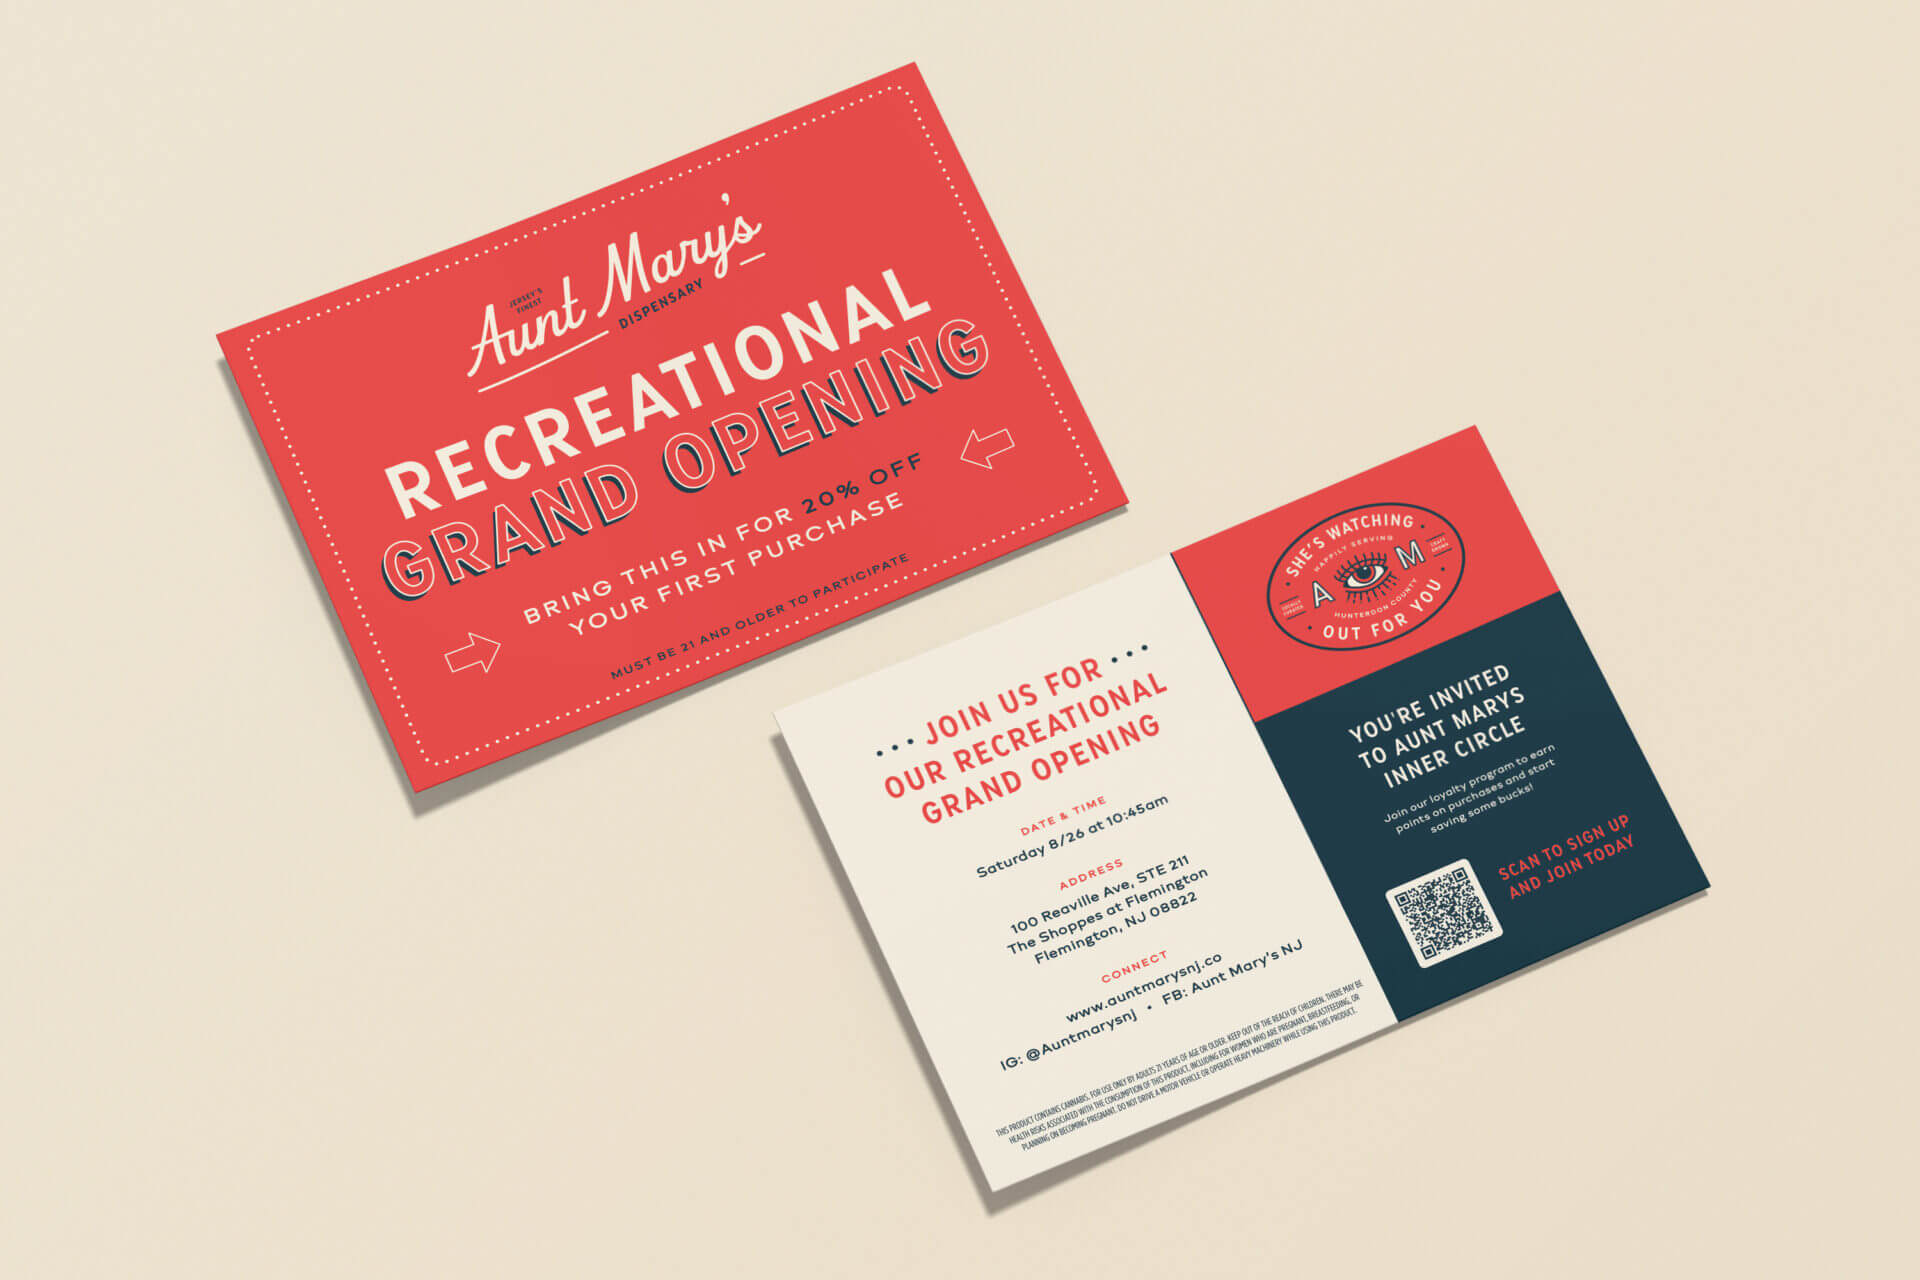 Aunt Mary's Leaflet Design